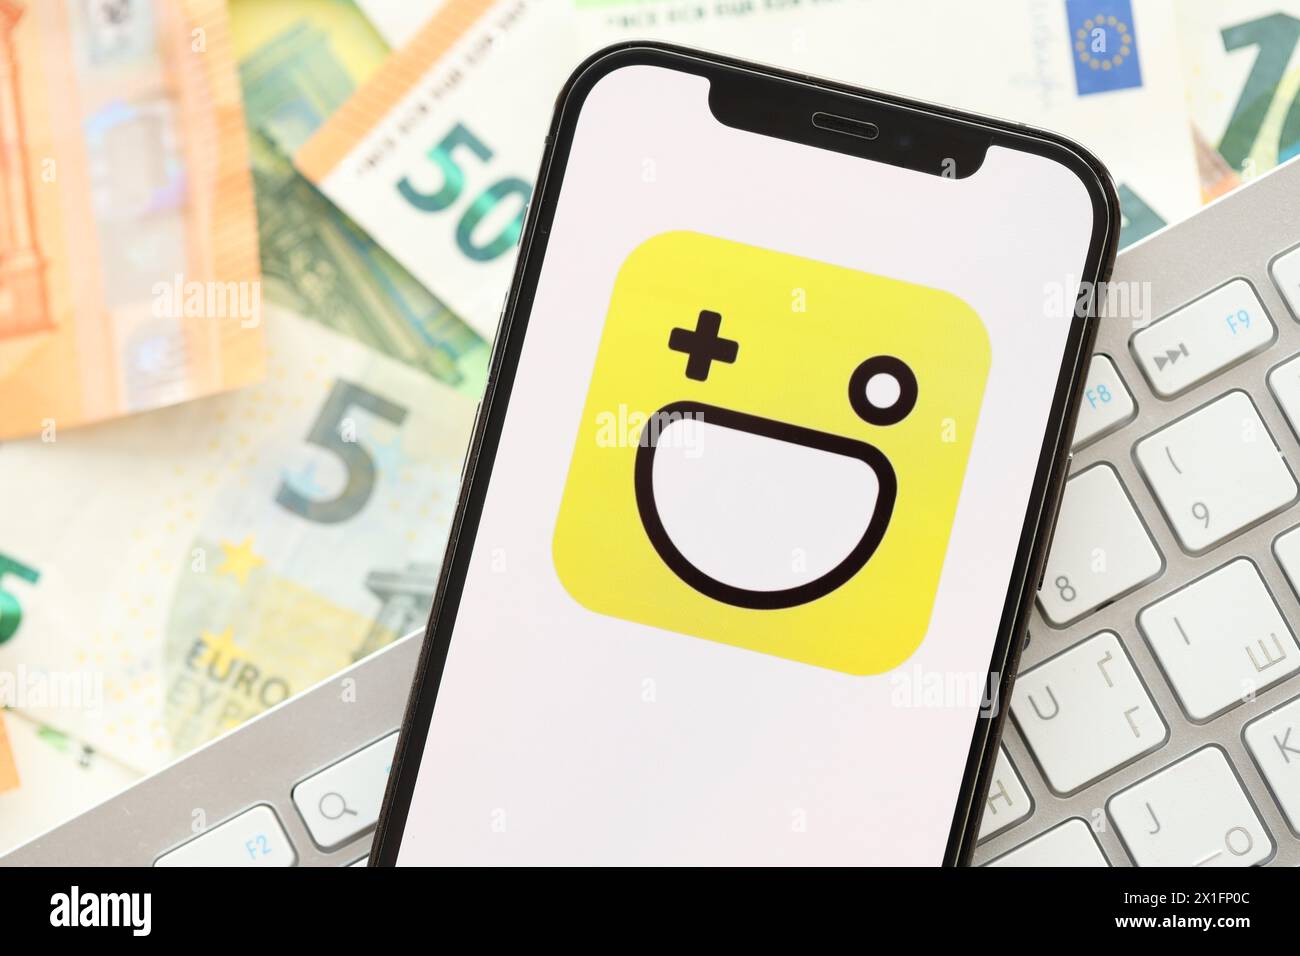 KYIV, UKRAINE - APRIL 1, 2024 Hago icon on smartphone screen on many euro money bills. iPhone display with app logo with european currency euro banknotes and white keyboard Stock Photo